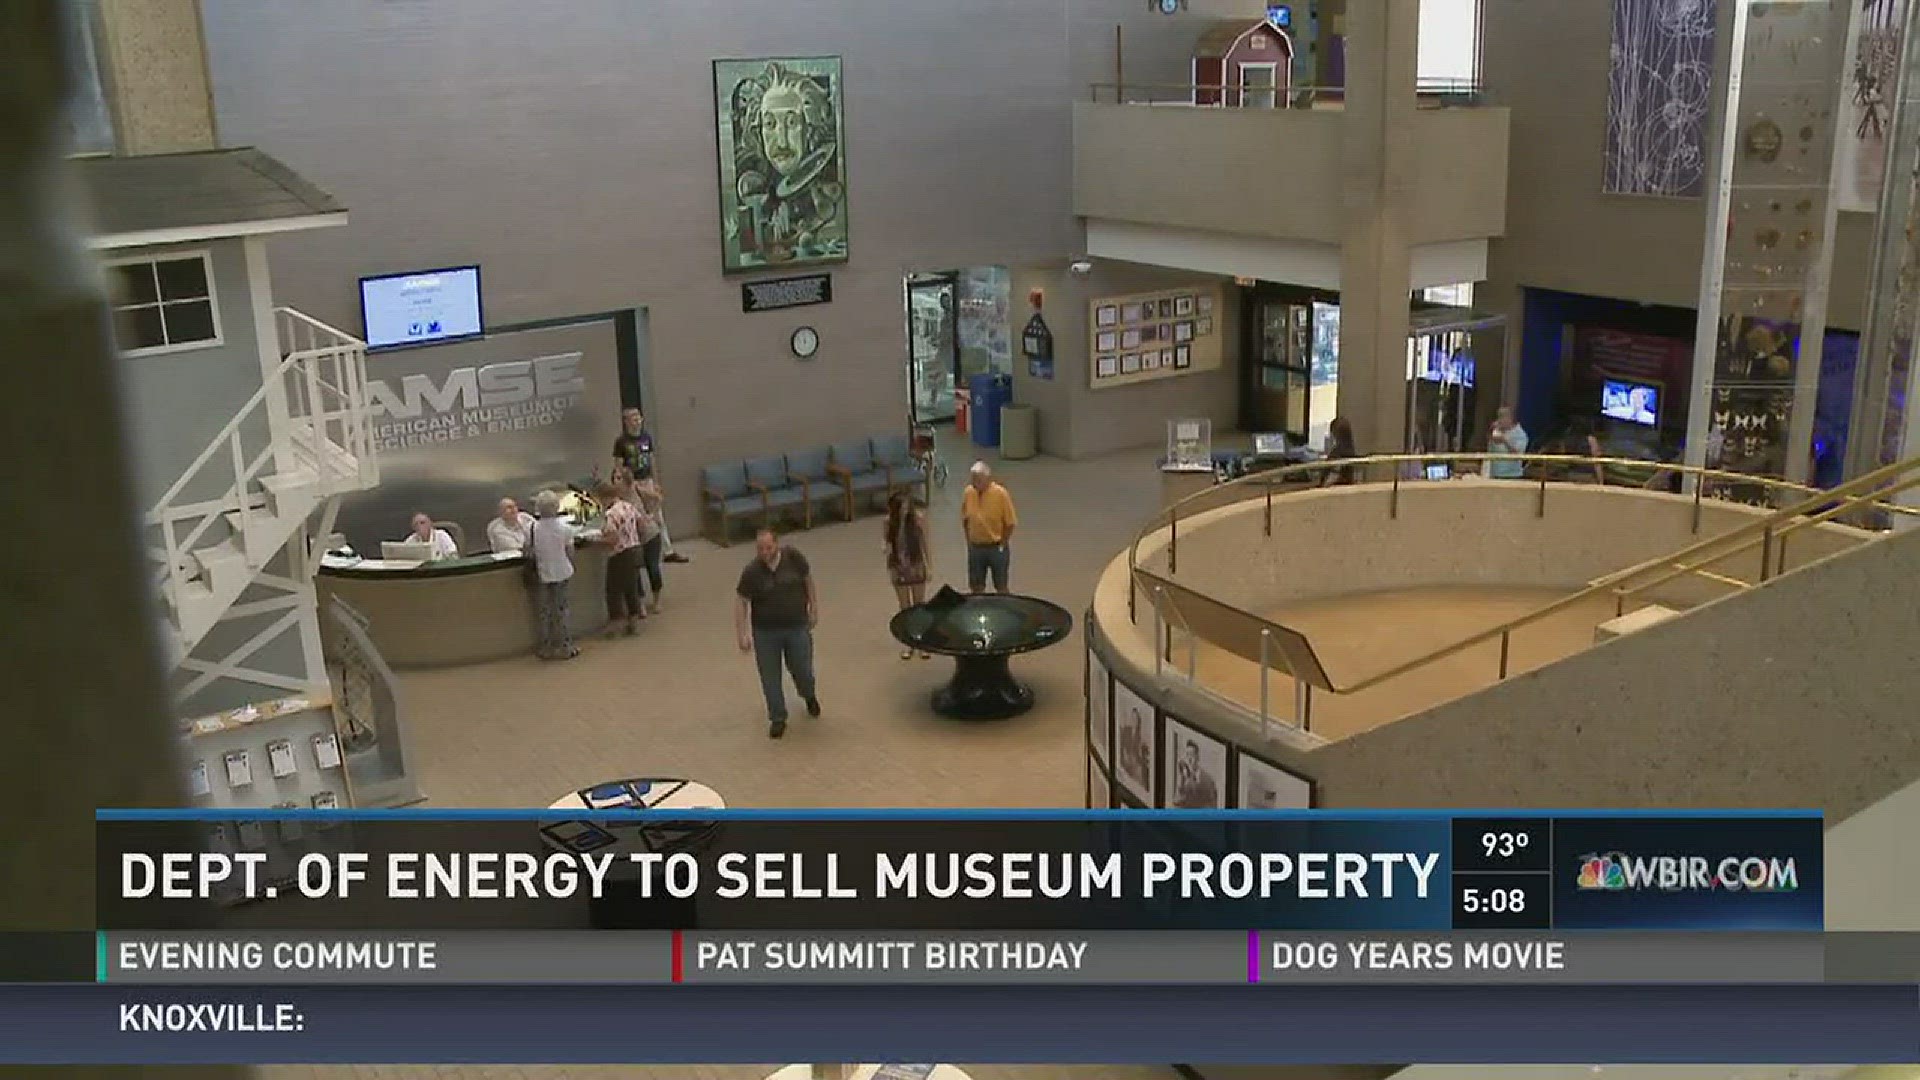 The future of the American Museum of Science and Energy is being discussed. It could likely move from its current site in the future, but won't close.